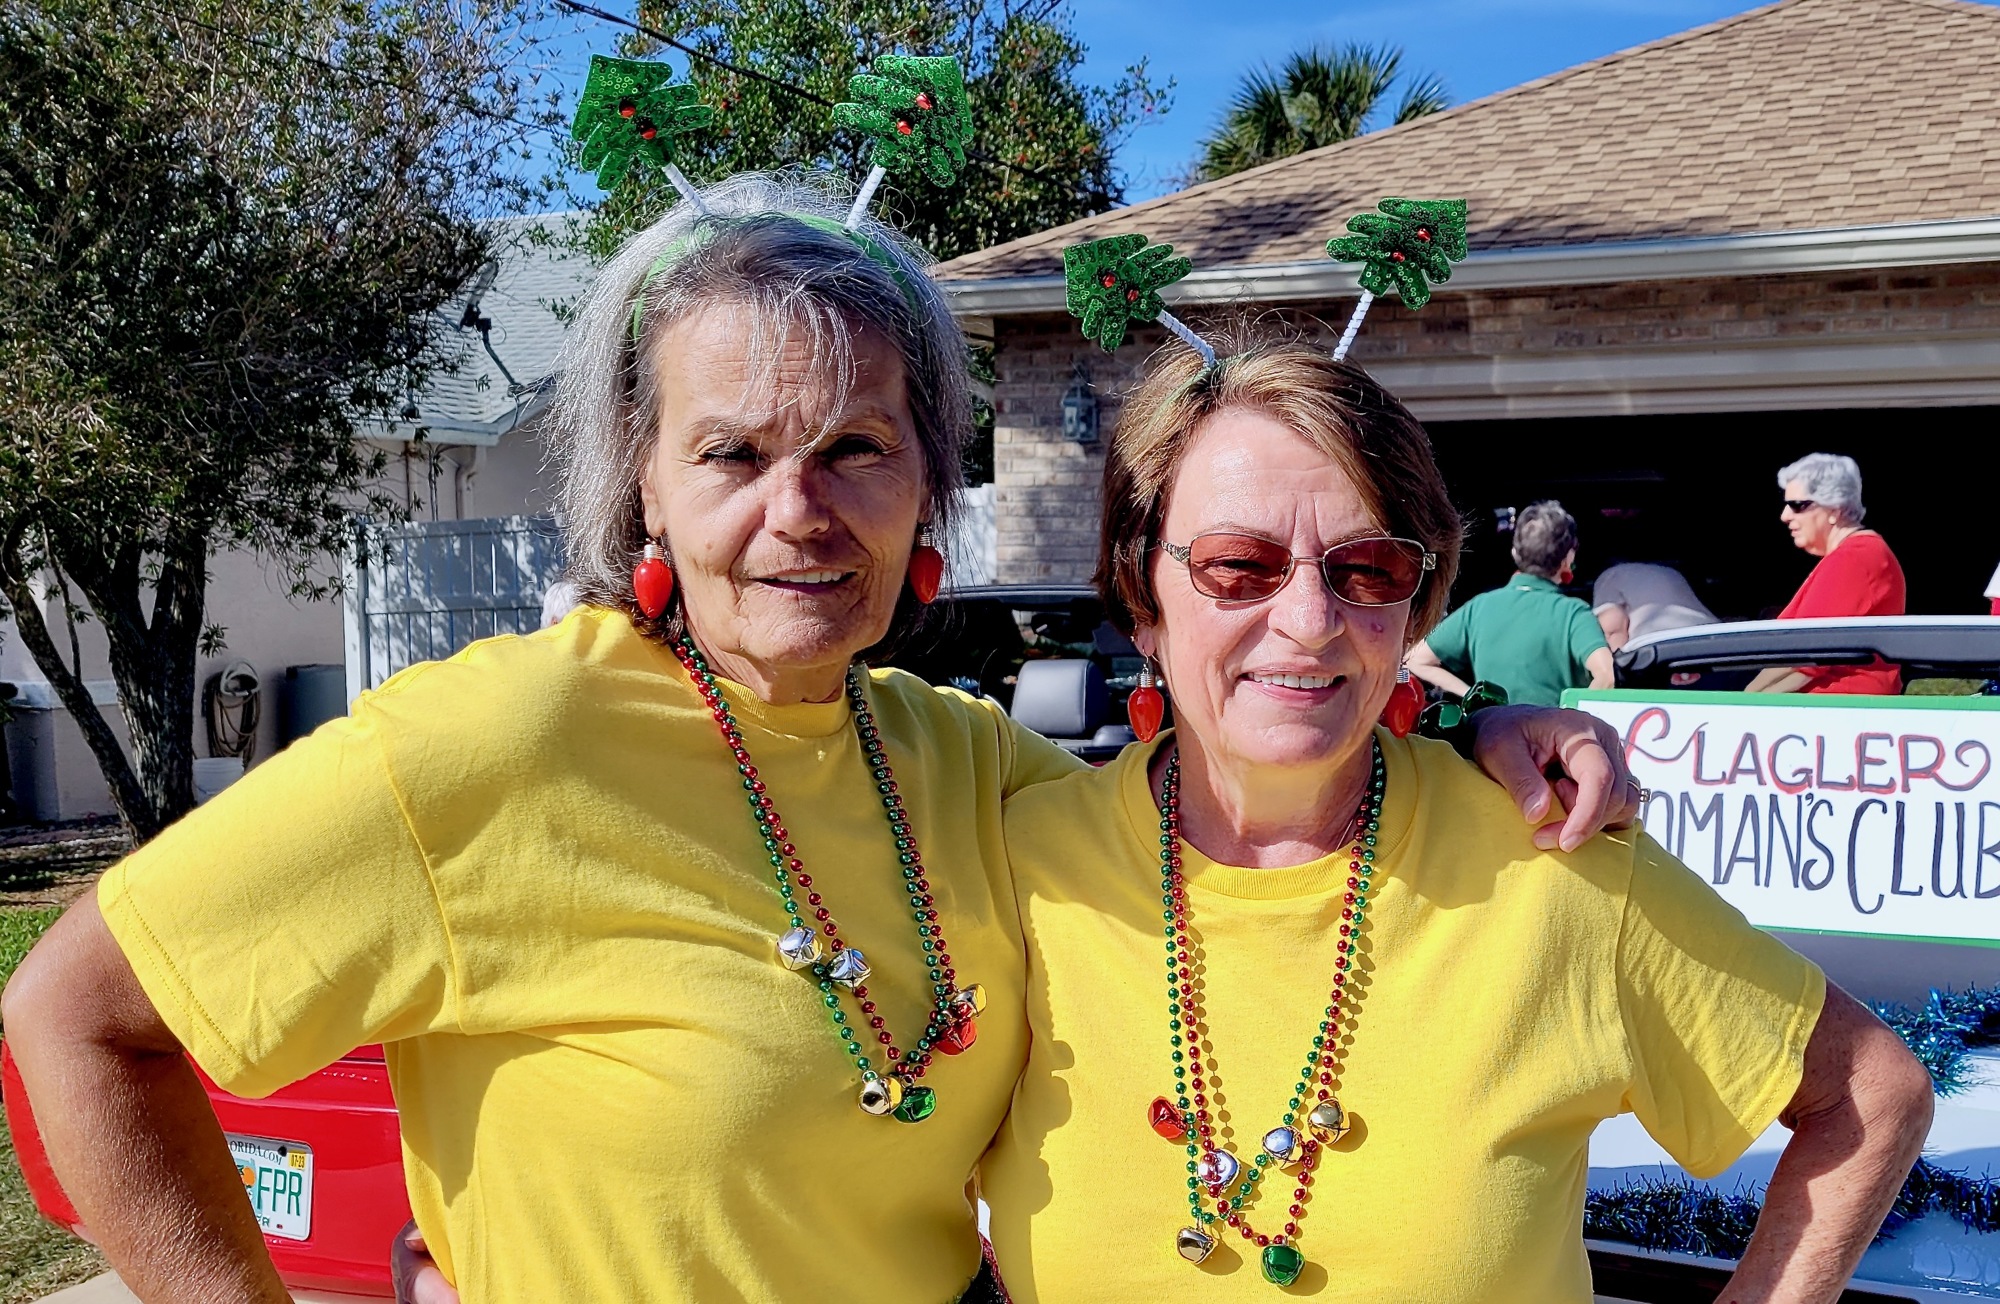 Barbara Macready and Mary Louk in their outfits for the Flagler Beach Holiday Parade in 2022. The two led the Flagler Woman's Club's members in the parade. Photo by Sierra Williams